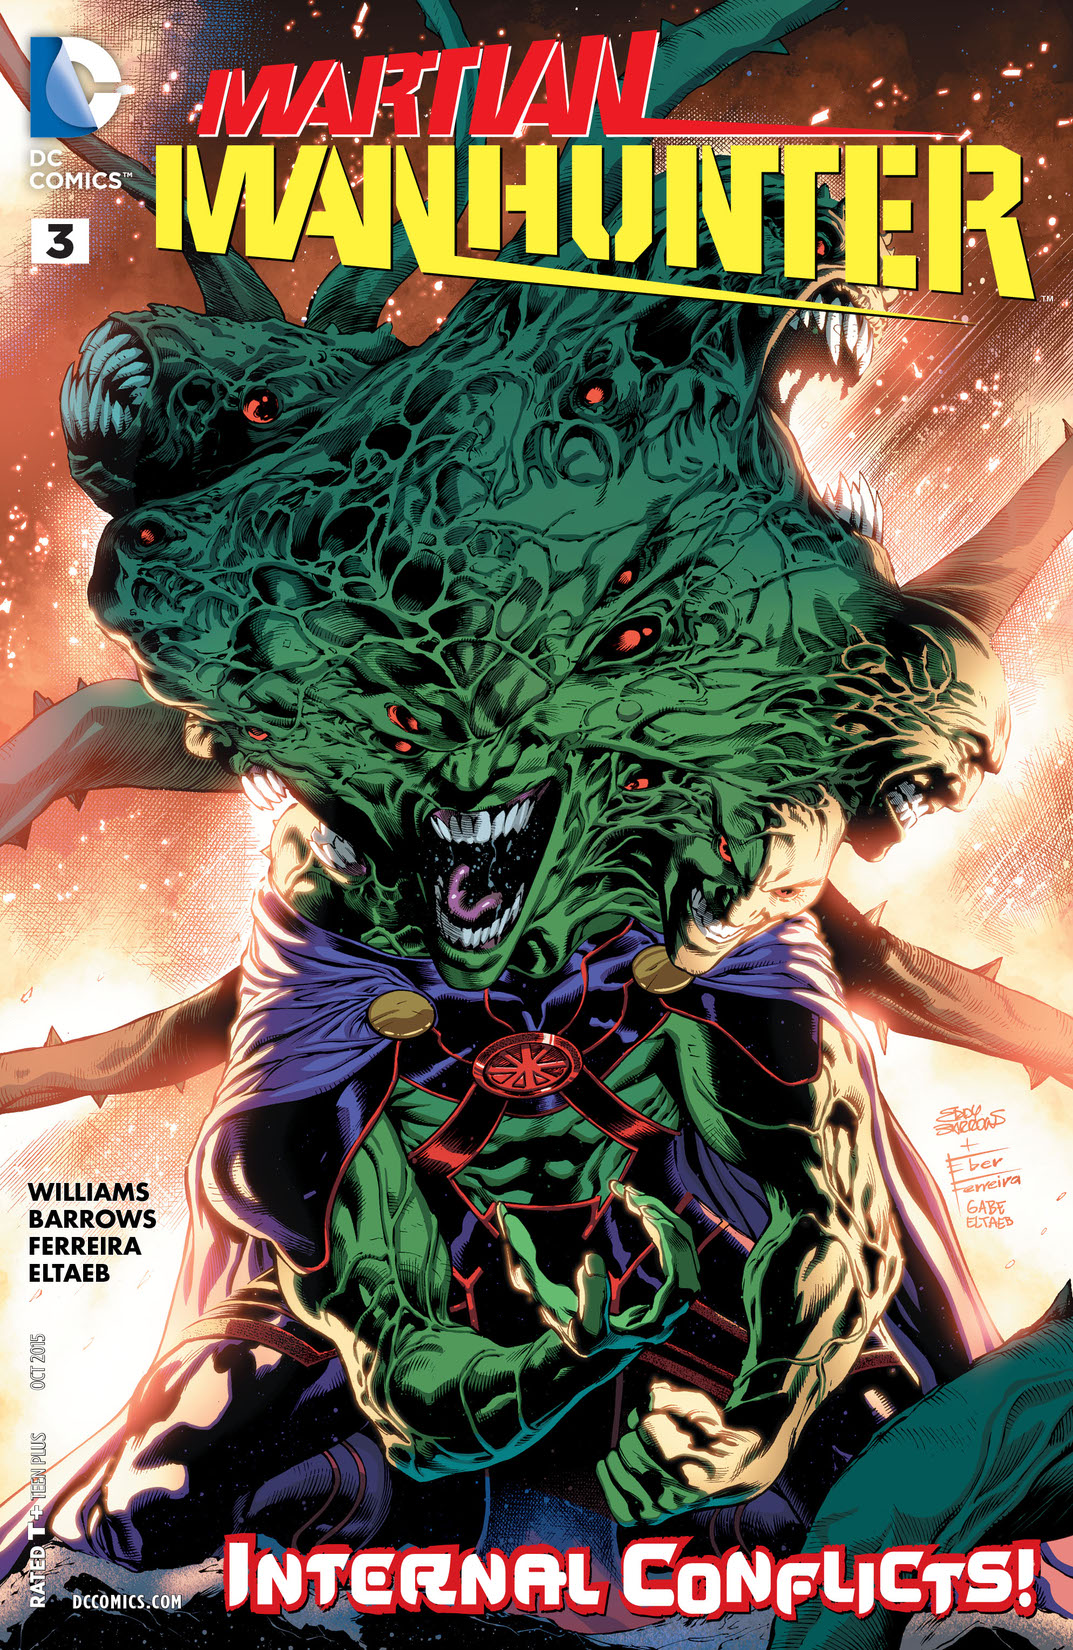 Martian Manhunter (2015-) #3 preview images